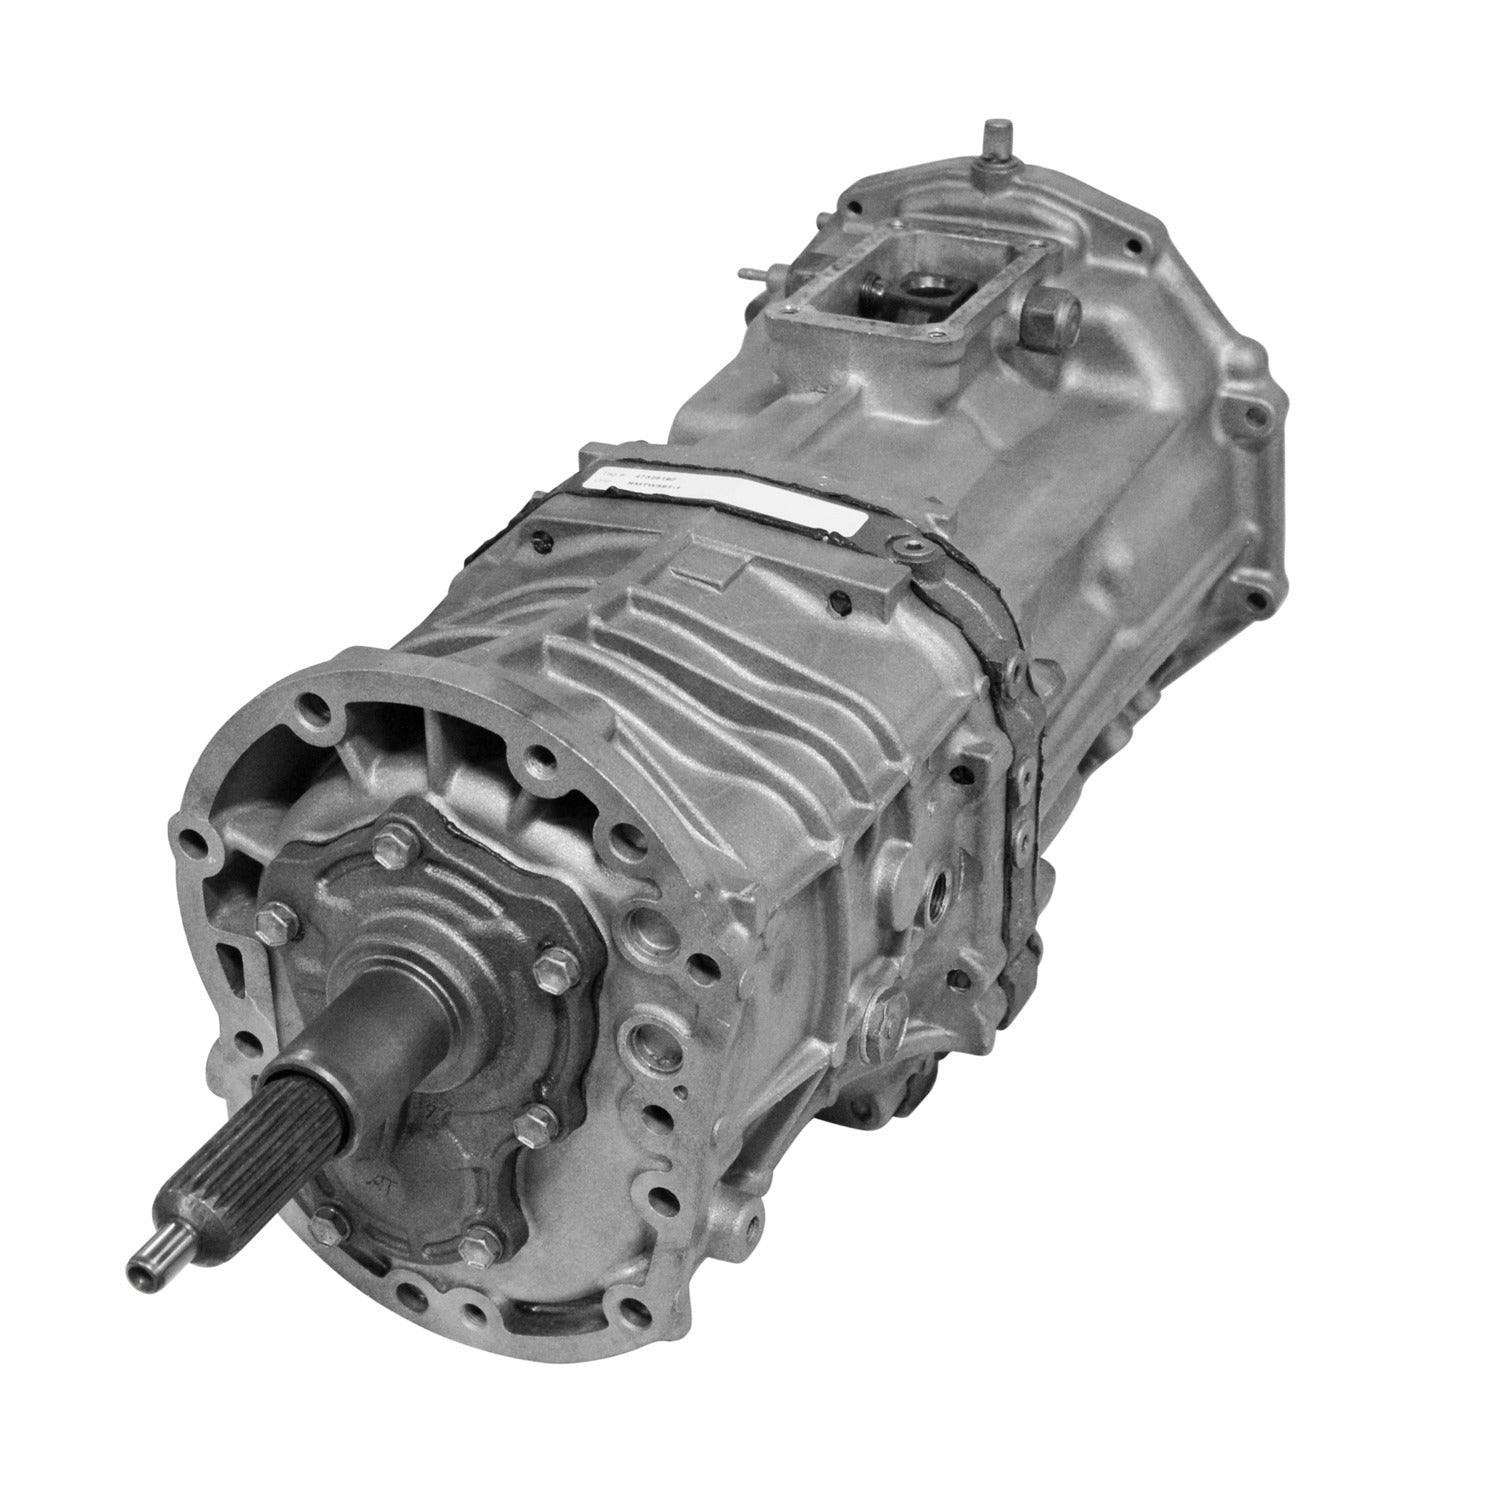 Manual Transmission for 1996-2004 Toyota 4Runner/Tacoma 4WD with 2.4/2.7L Inline-4 Engine